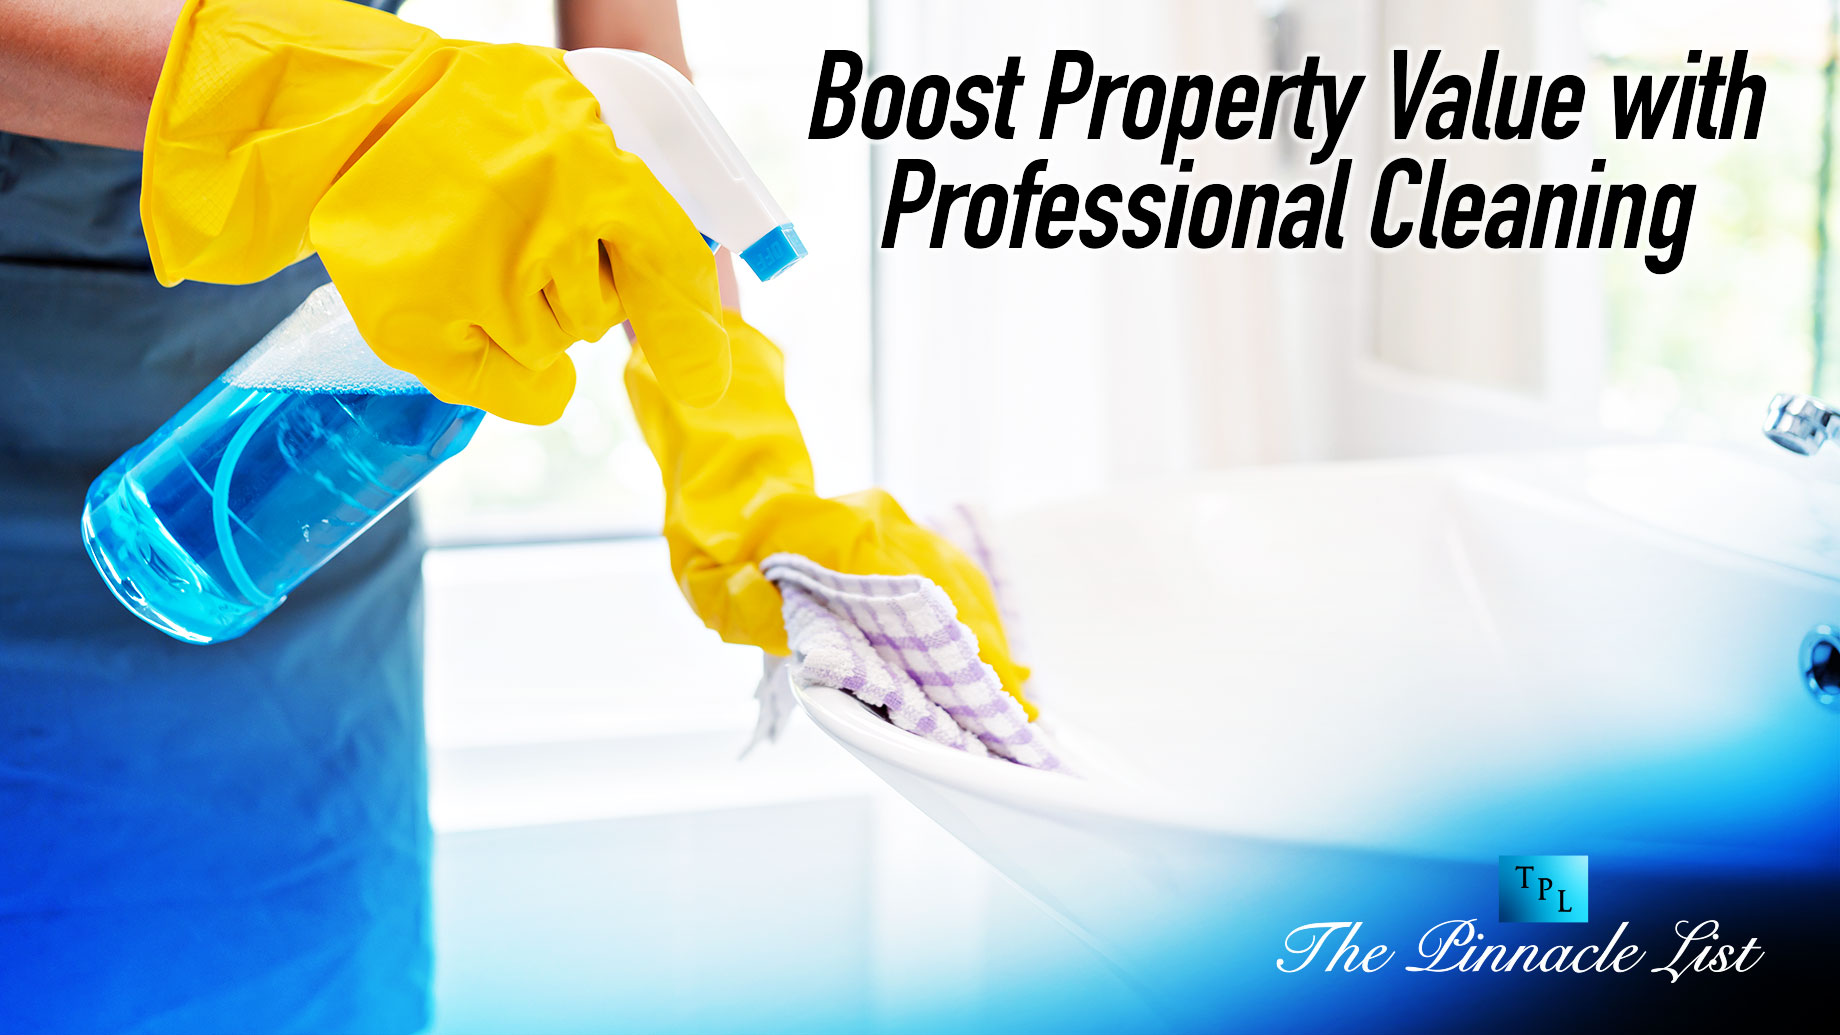 Boost Property Value with Professional Cleaning